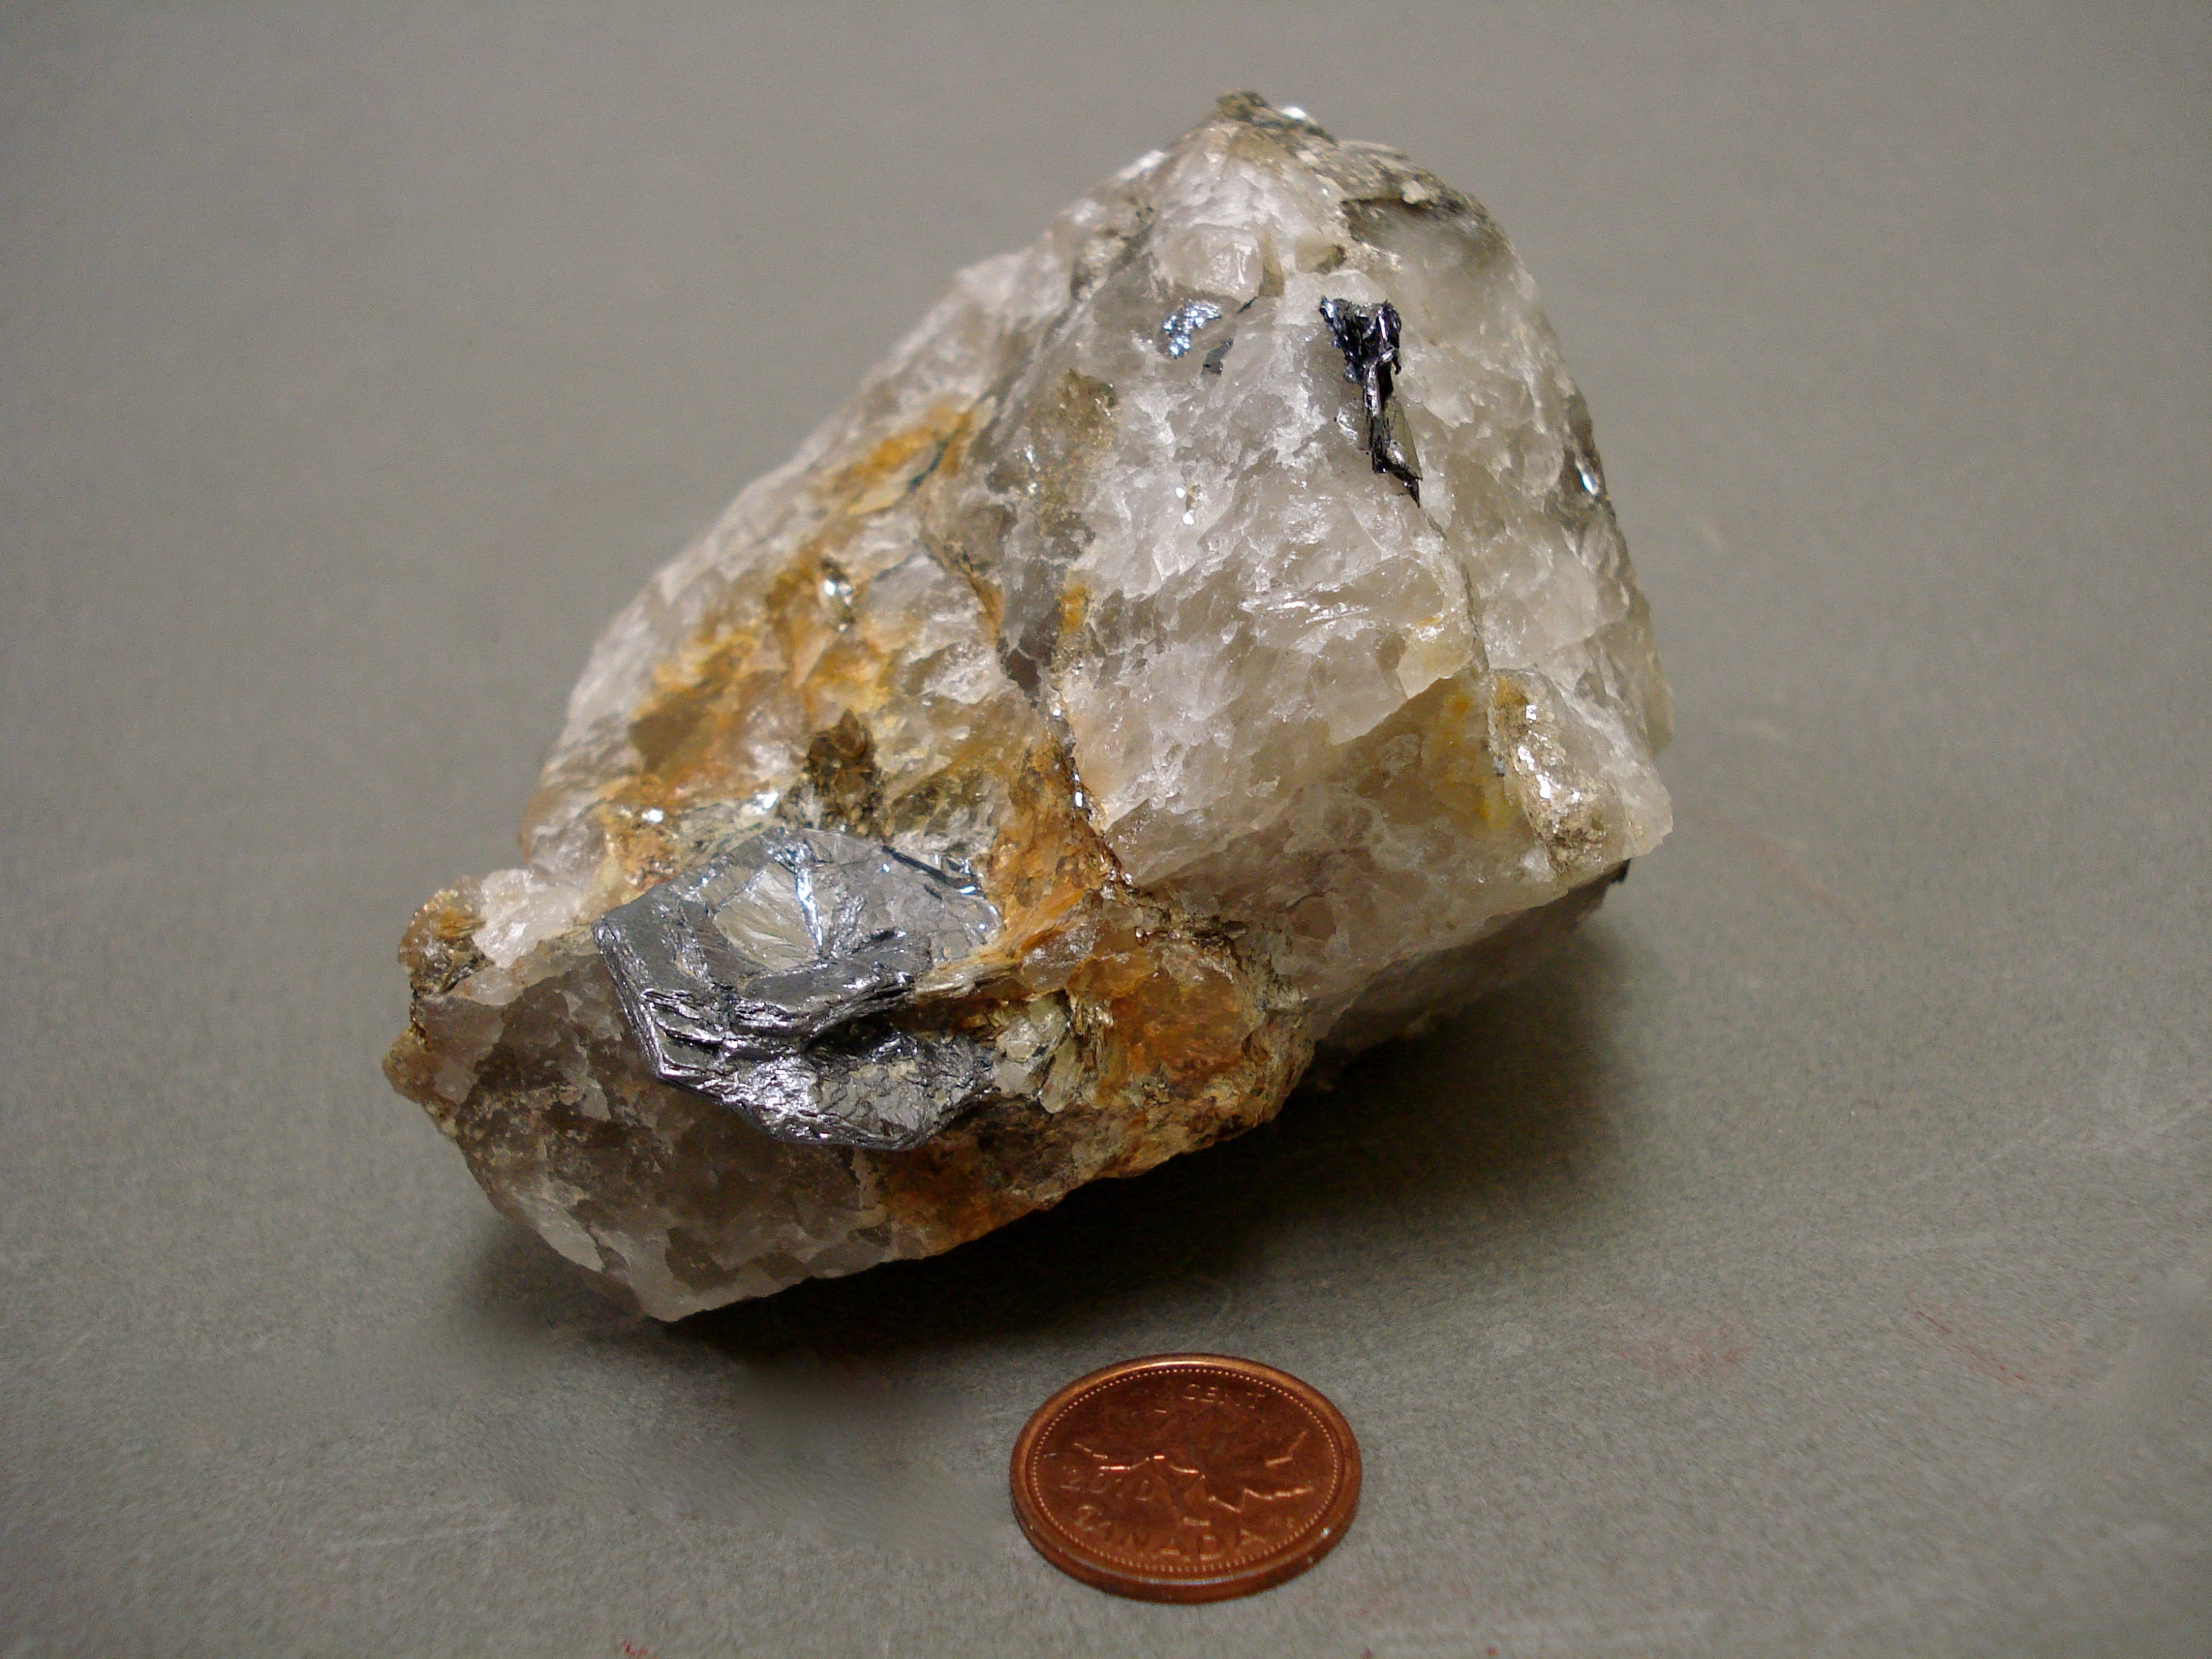 Molybdenite next to a penny for size comparison